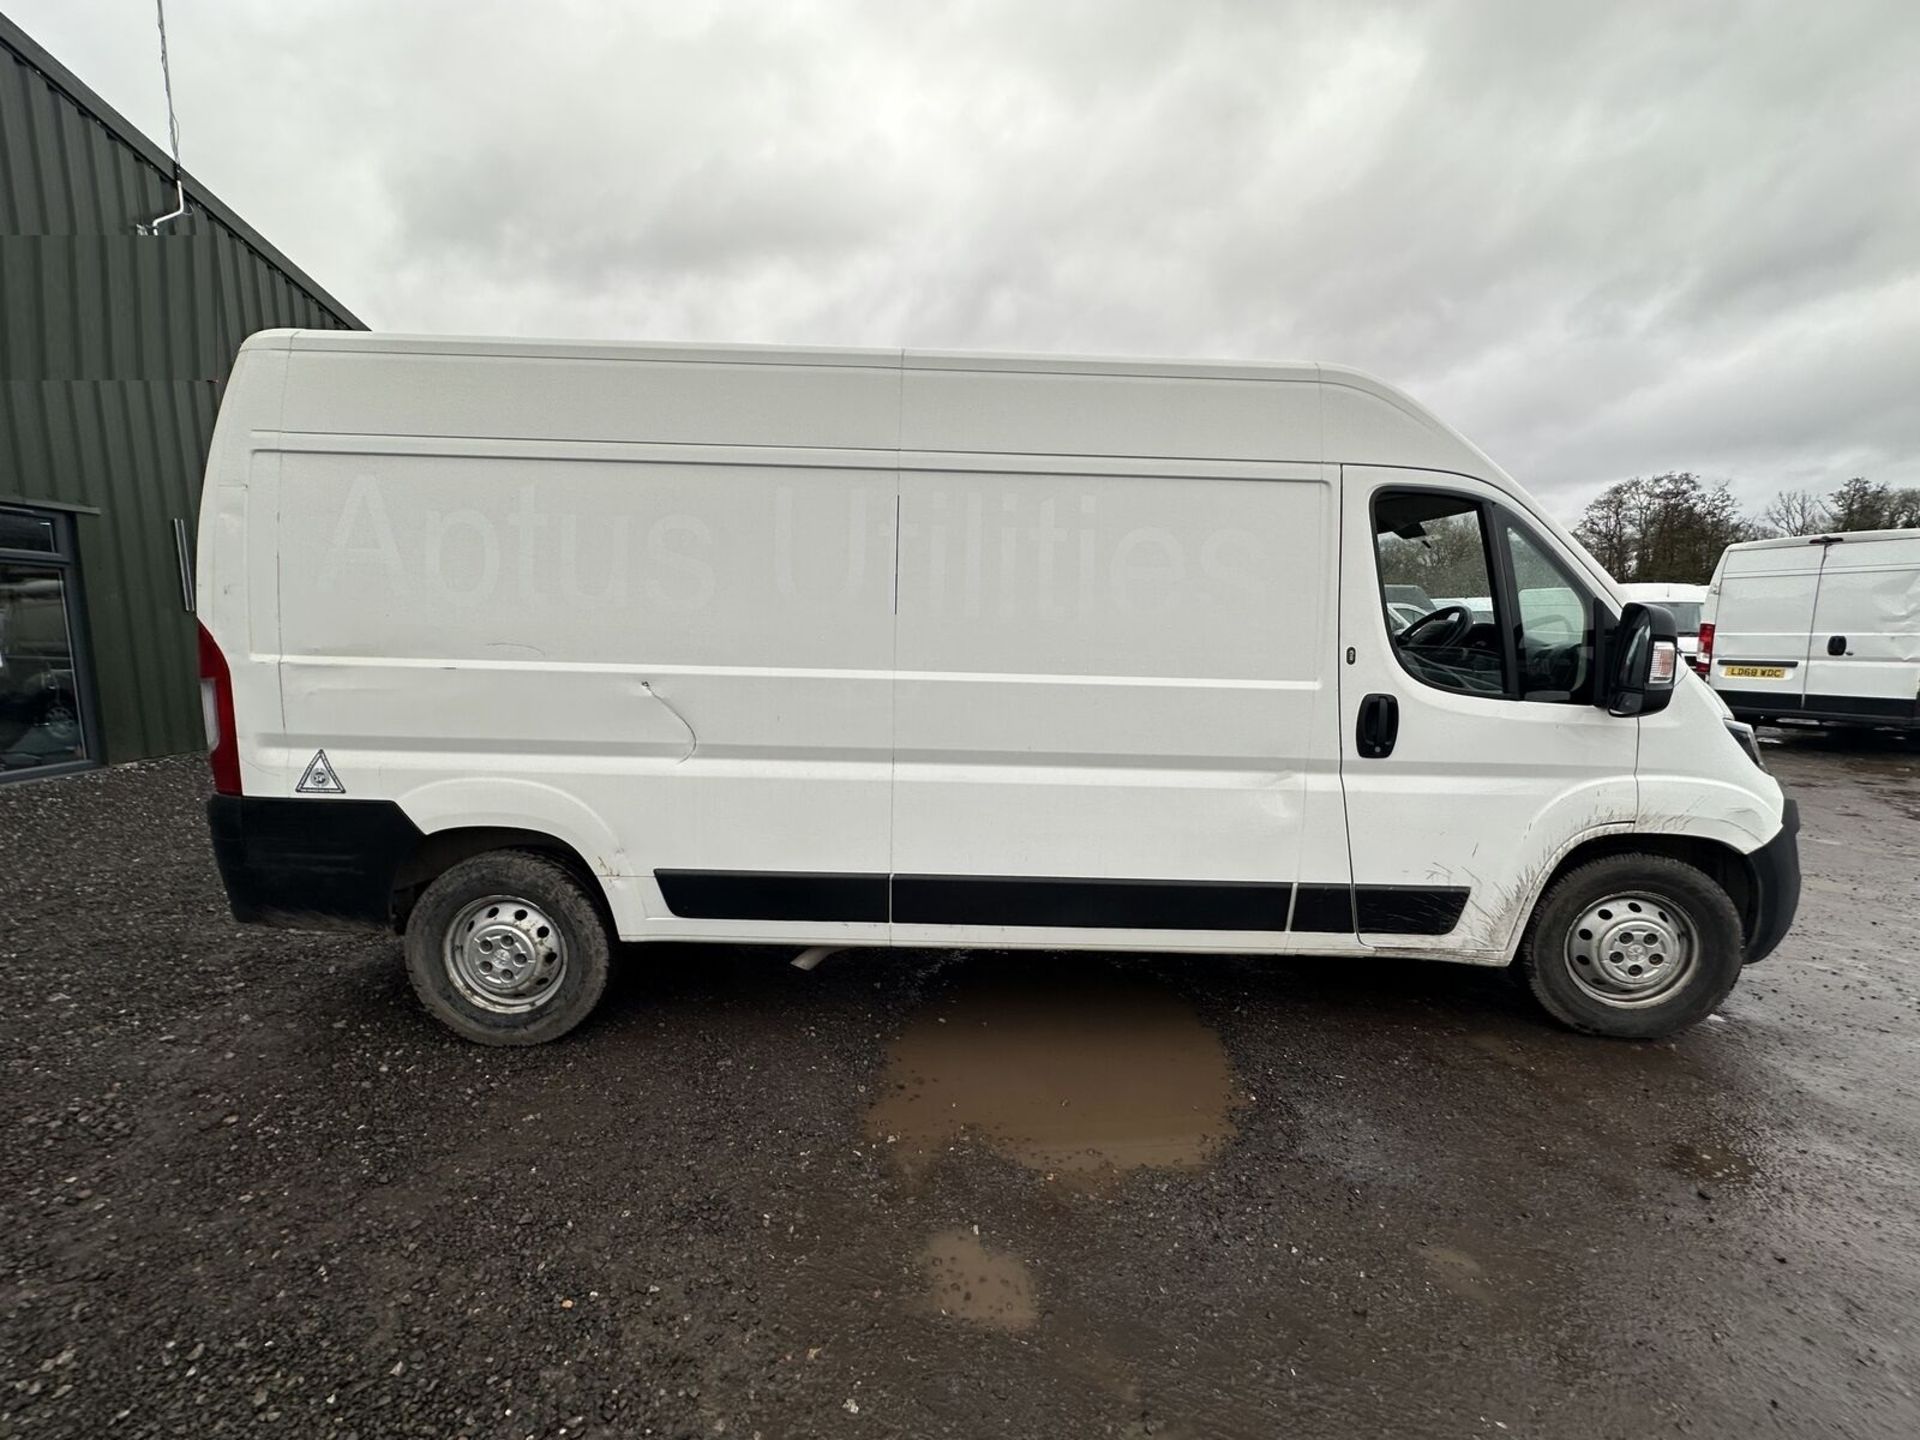 69 PLATE PEUGEOT BOXER: BLUE HDI POWER, READY FOR DUTY - Image 8 of 19